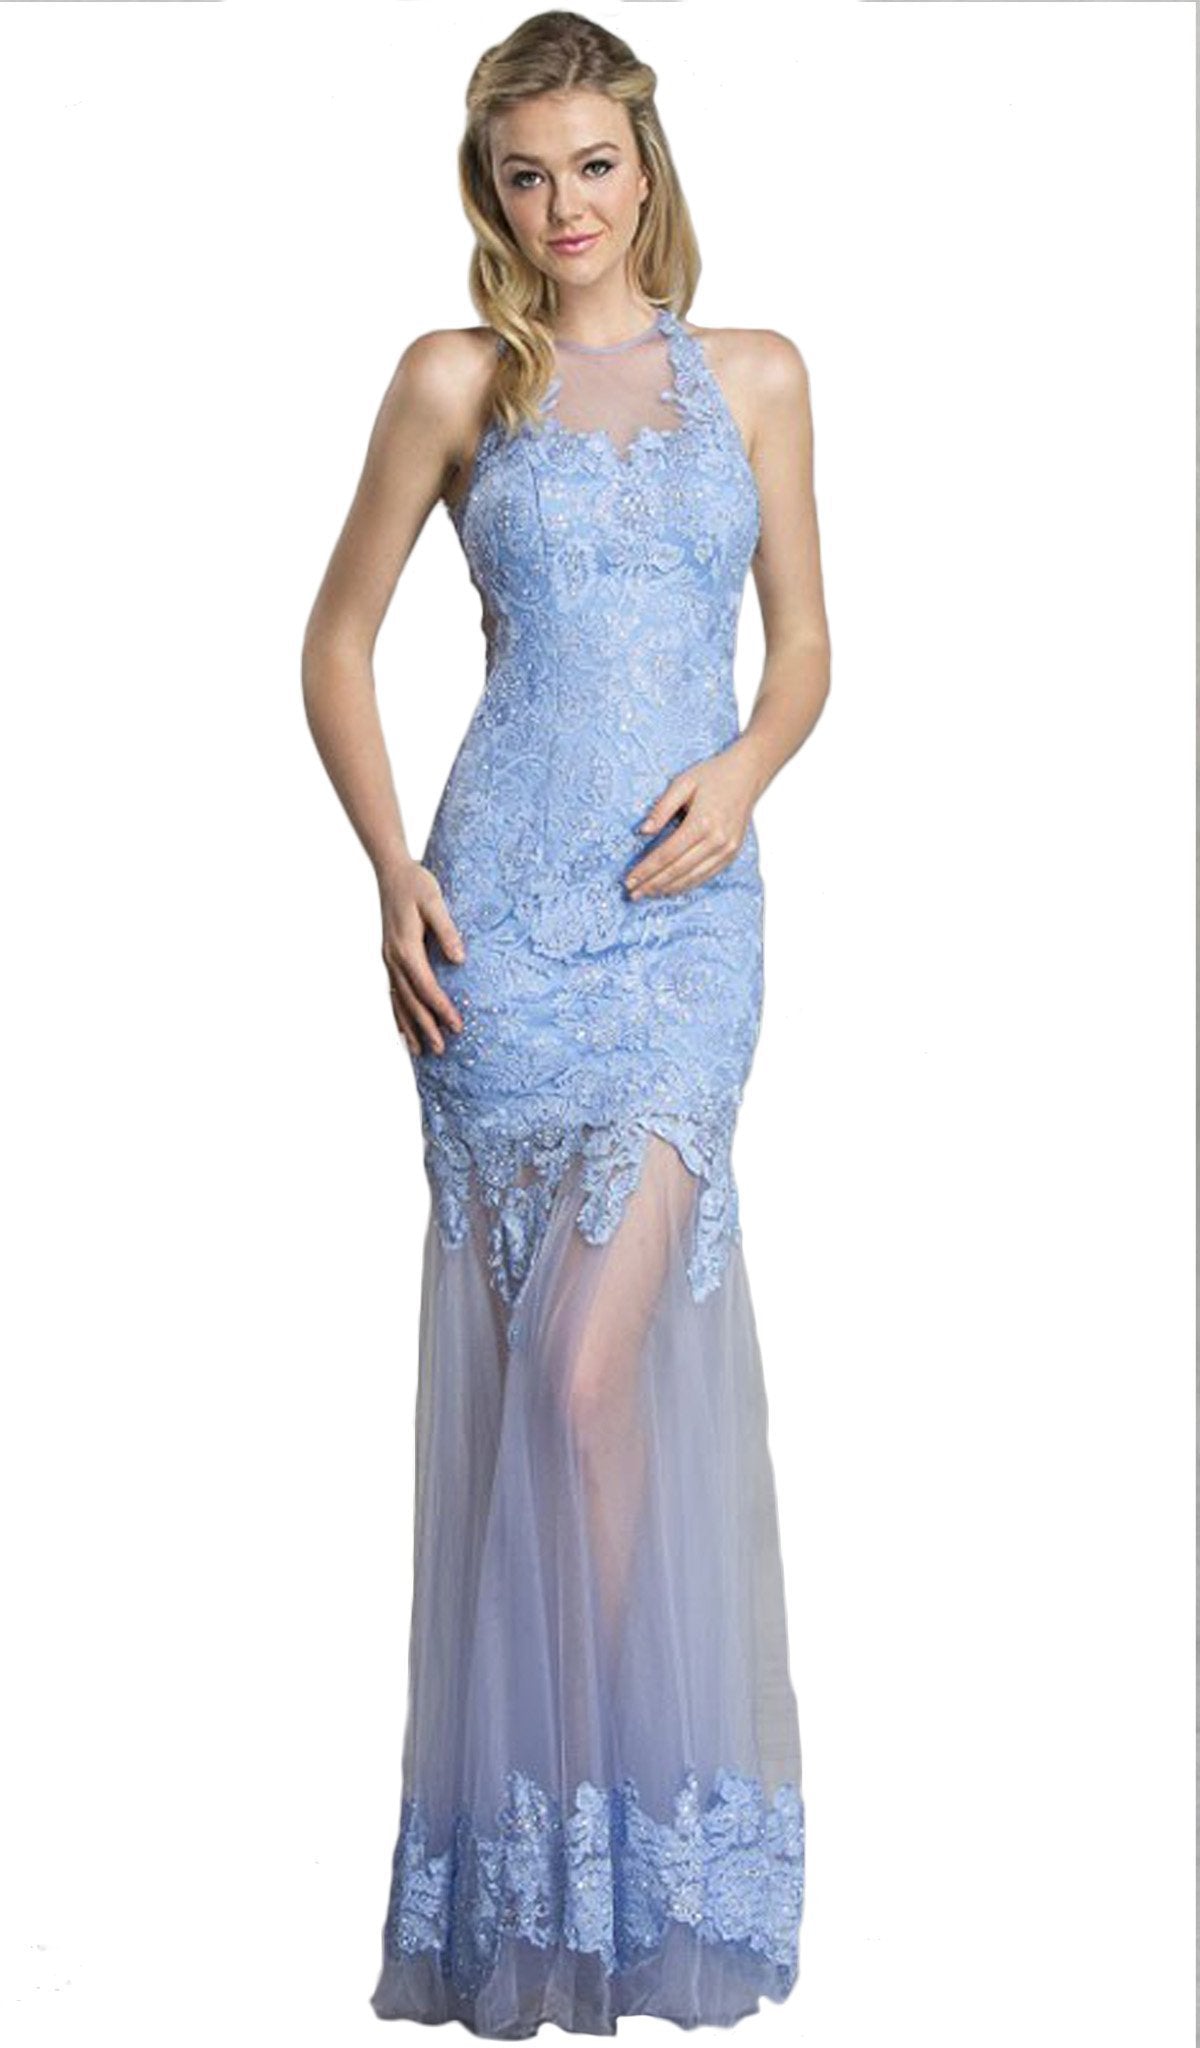 Image of Aspeed Design - Long Sheath Gown with Sheer Illusion Skirt